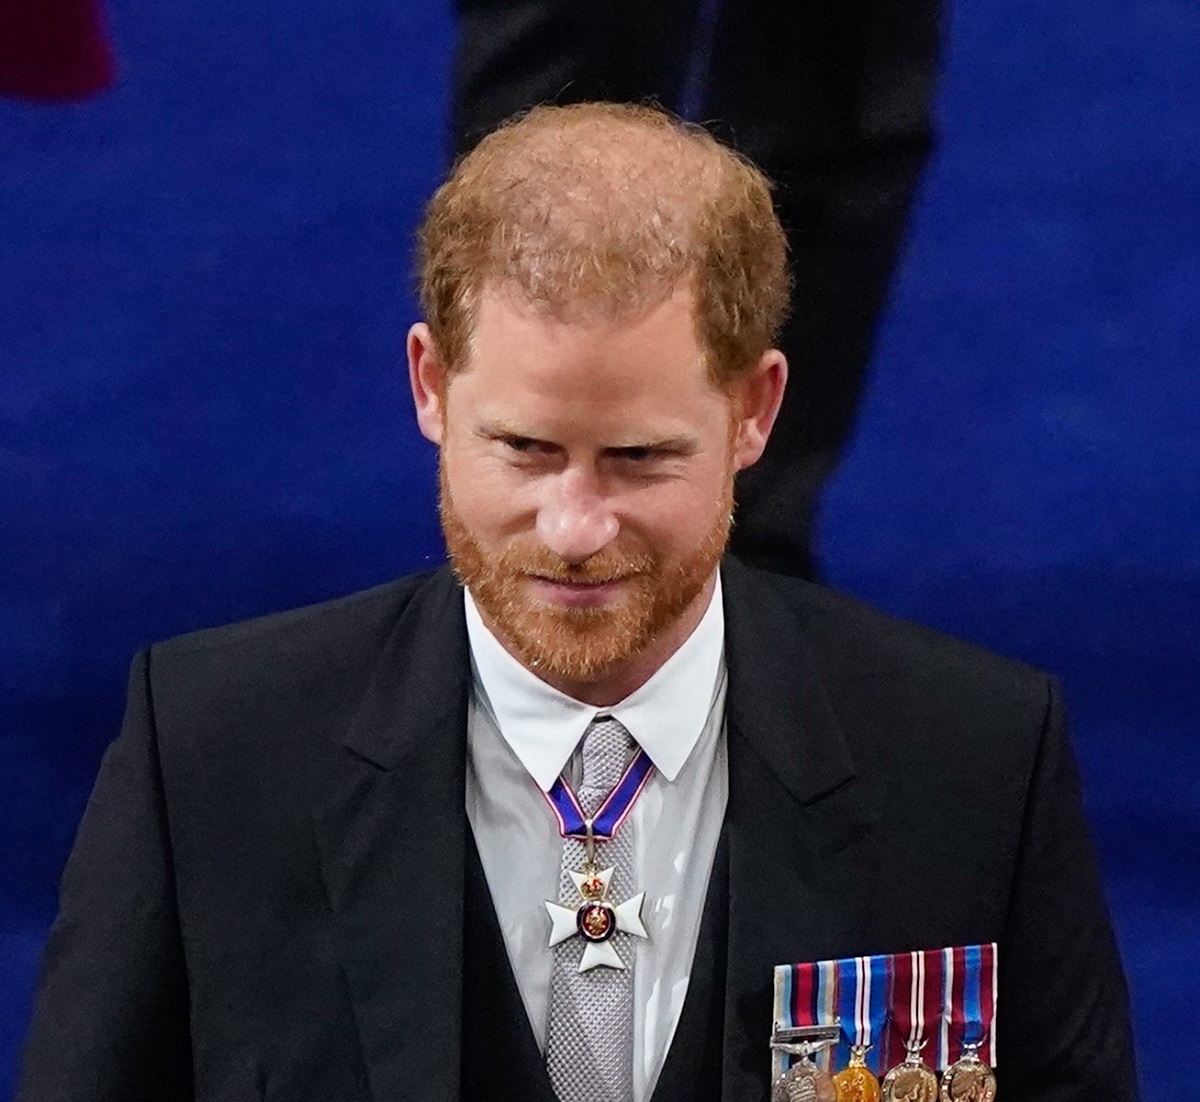 Prince Harry Acted ‘Cocky’ and ‘Without Shame’ at King Charles’ Coronation, Says Body Language Expert